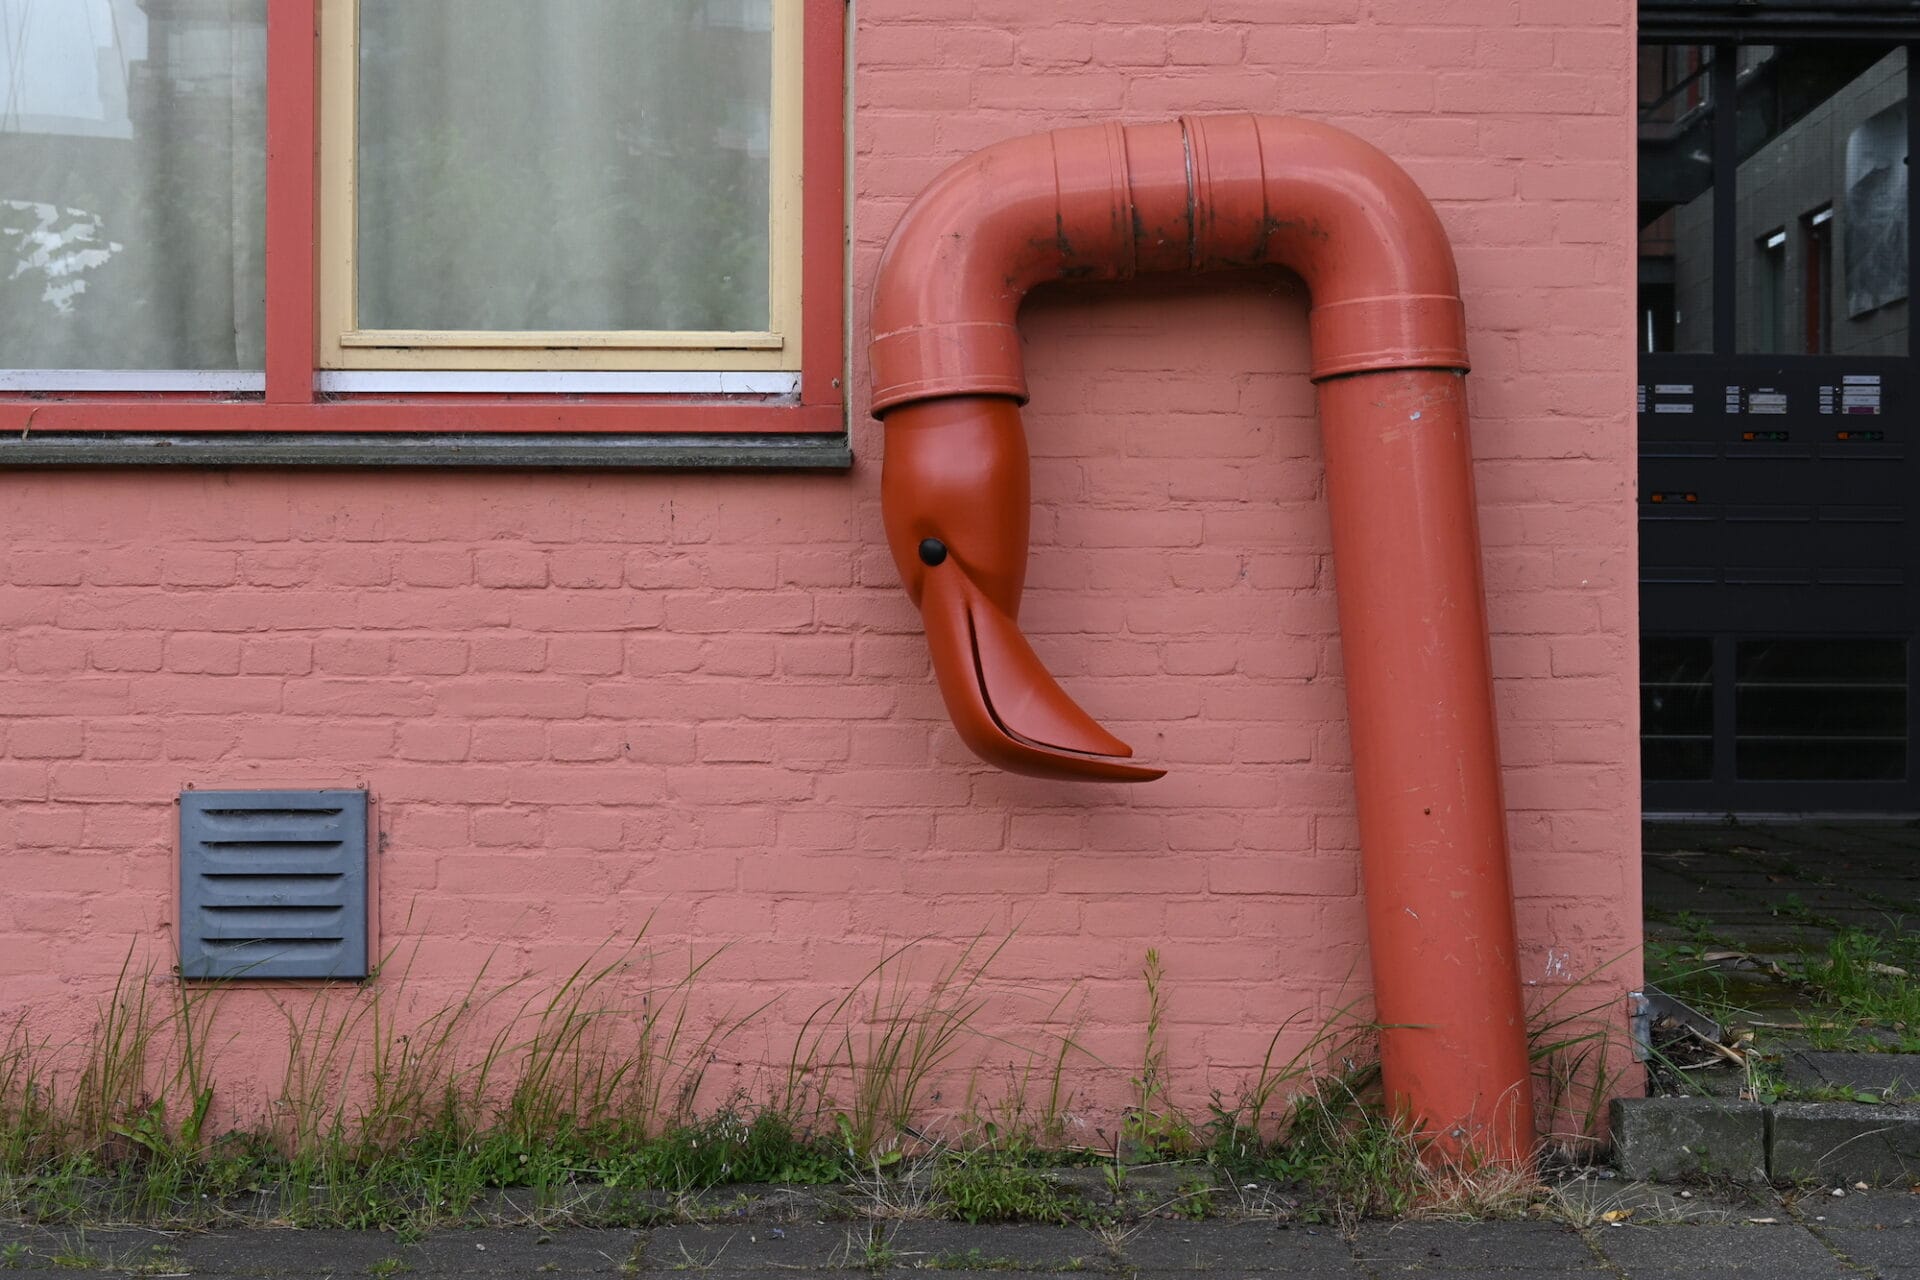 A sculptural intervention on a large pink duct outside, with a flamingo's head stuck in the end of the pipe.